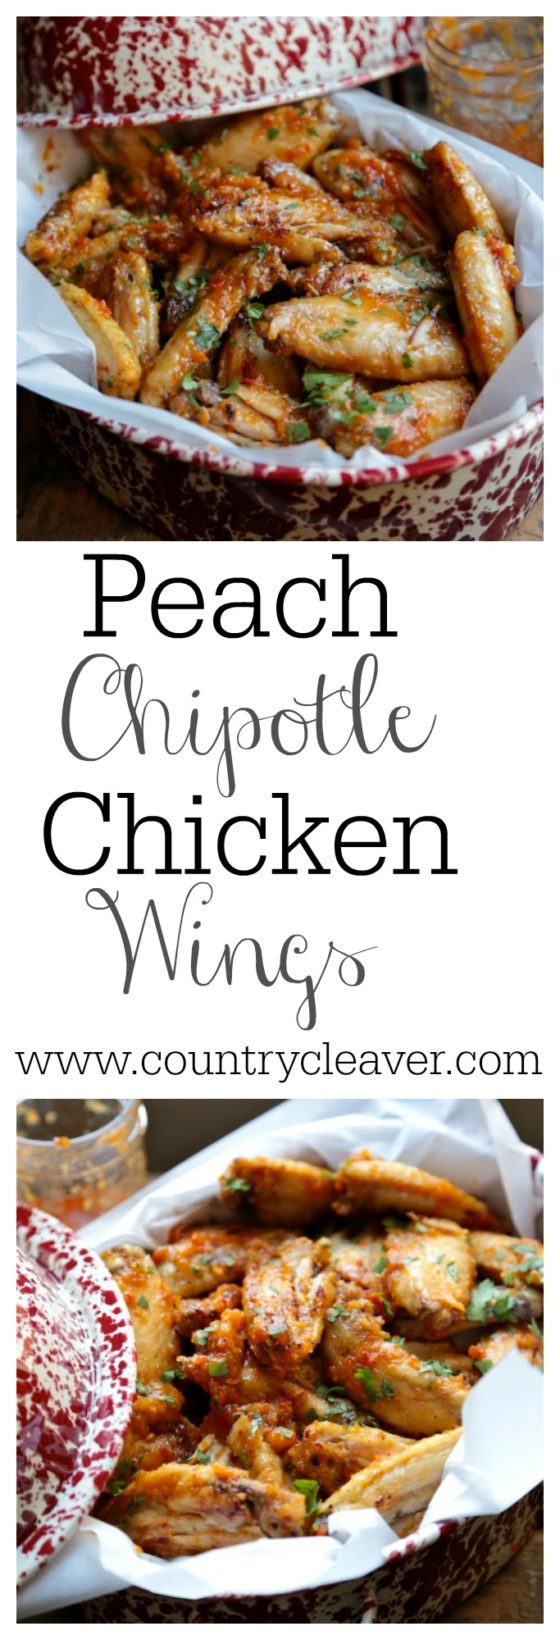 Peach Chipotle Chicken Wings